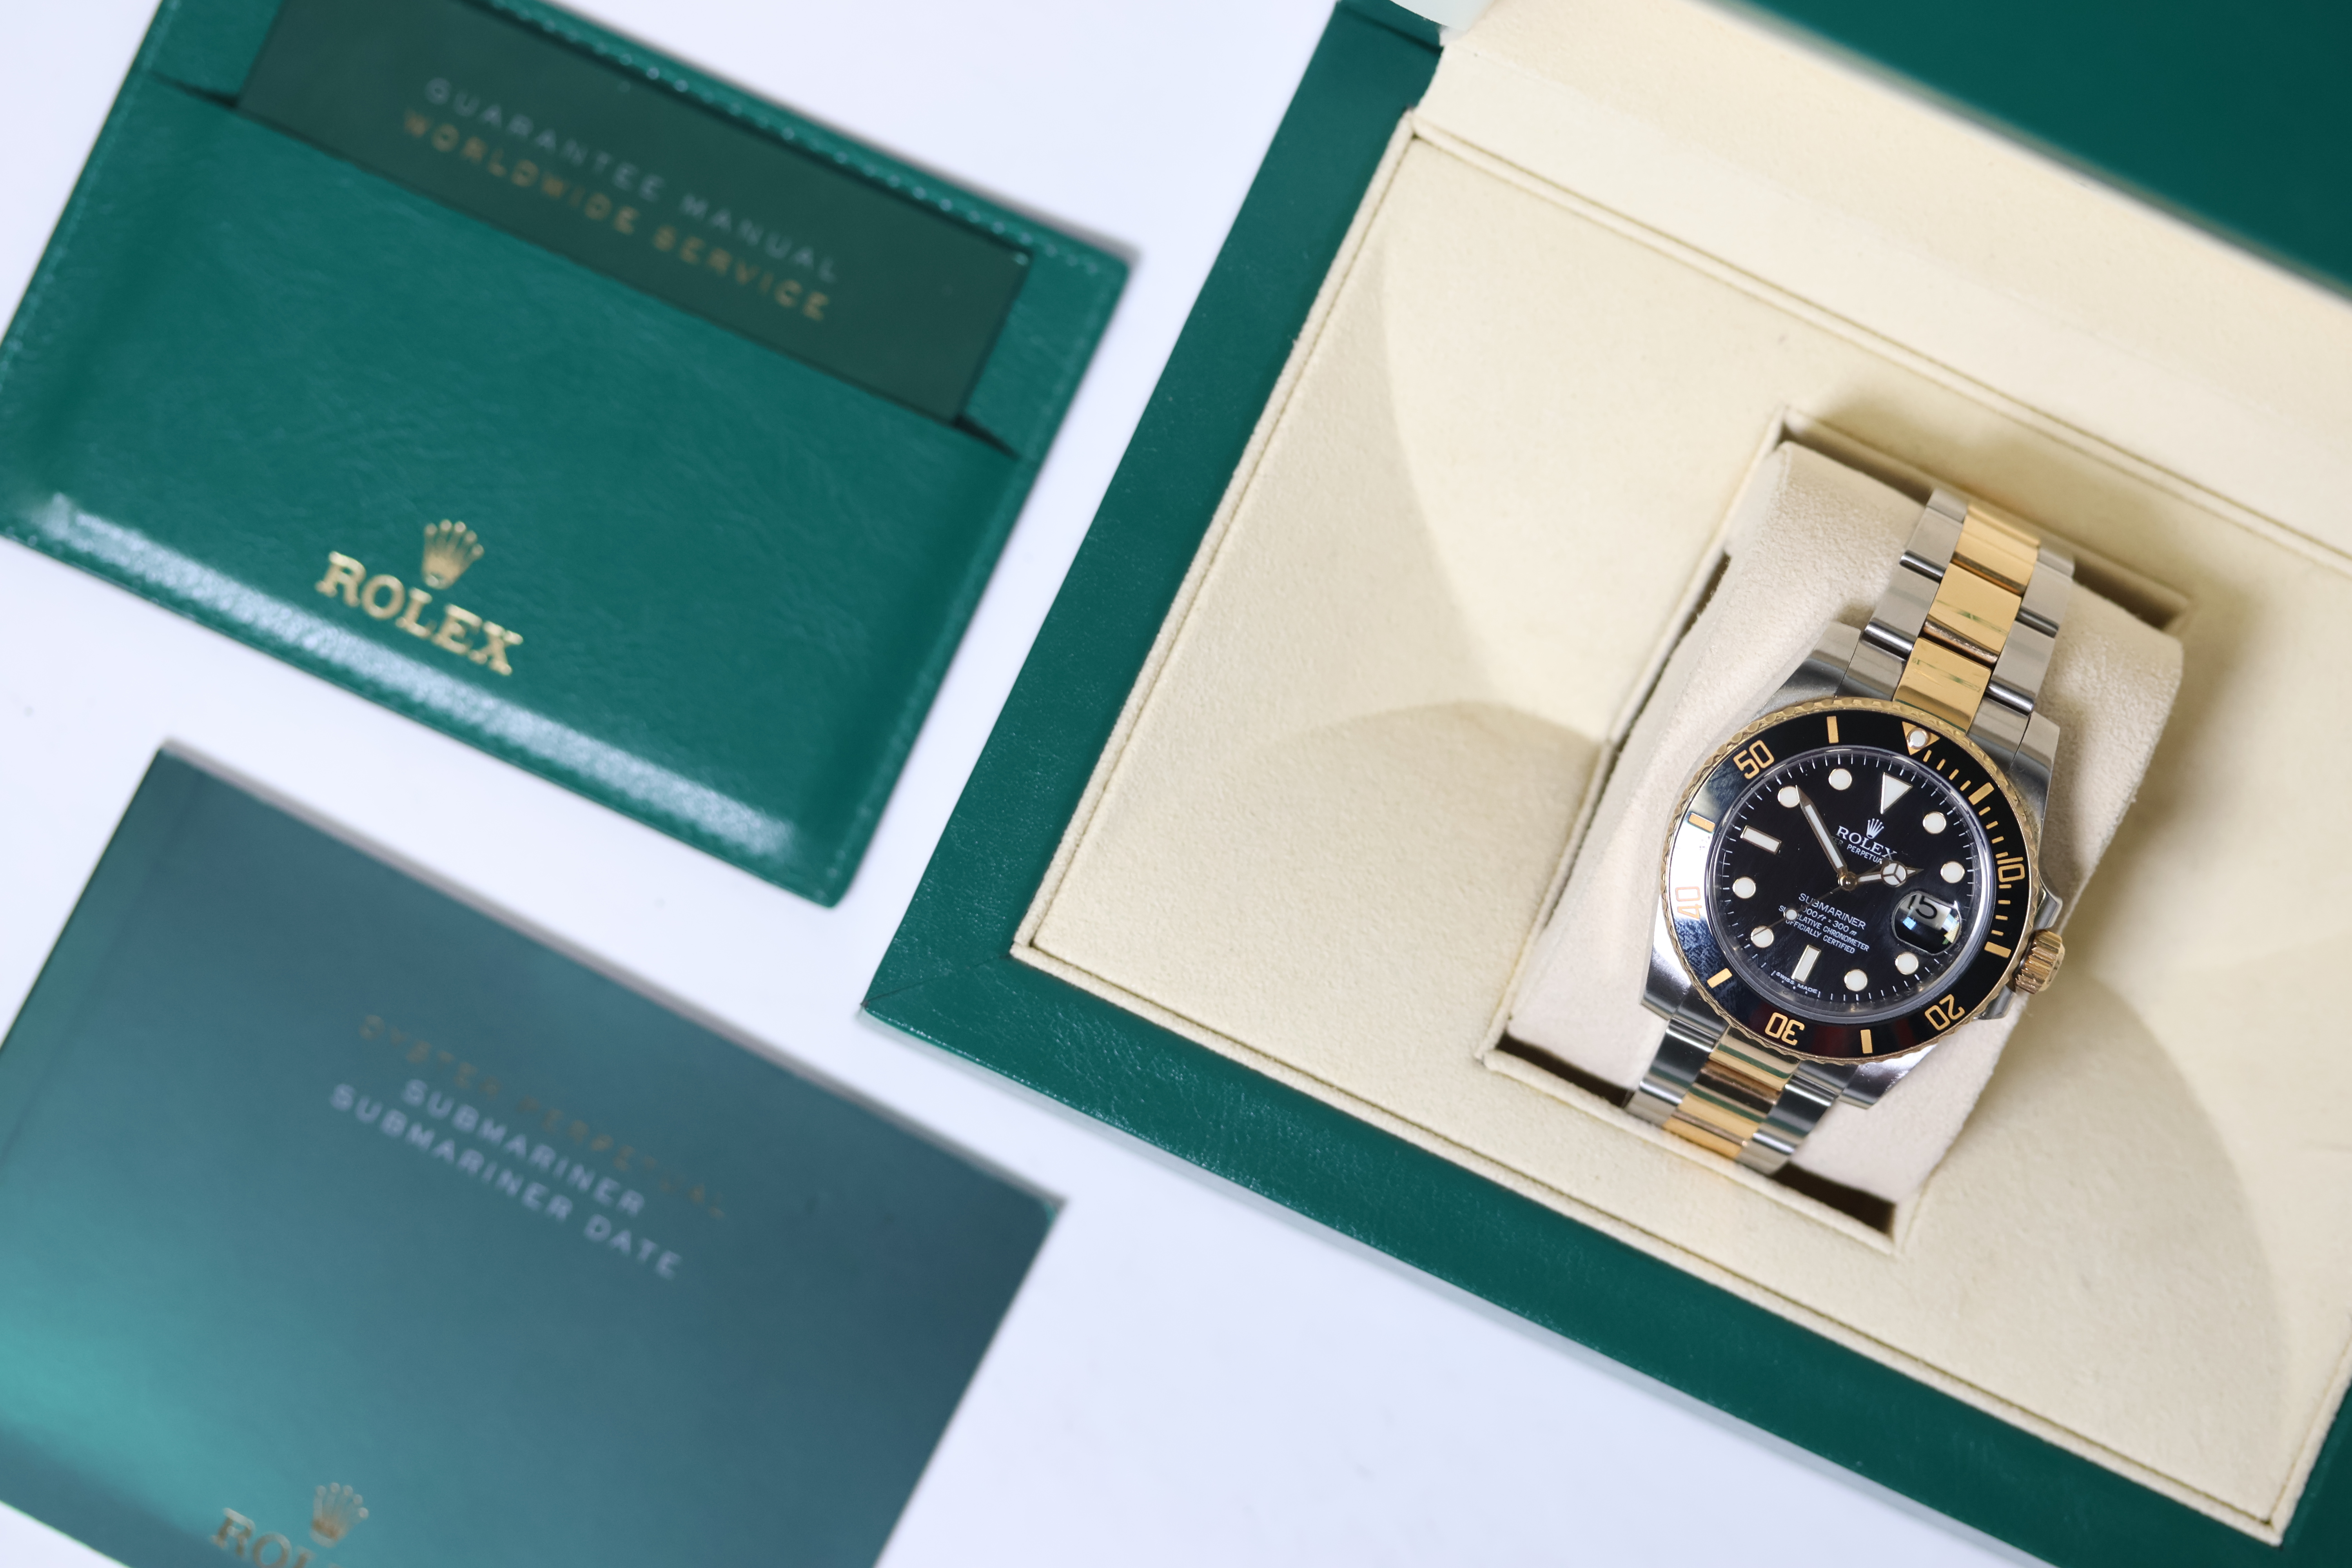 Rolex Submariner Date Reference 116613LN Steel and Gold - Image 8 of 8